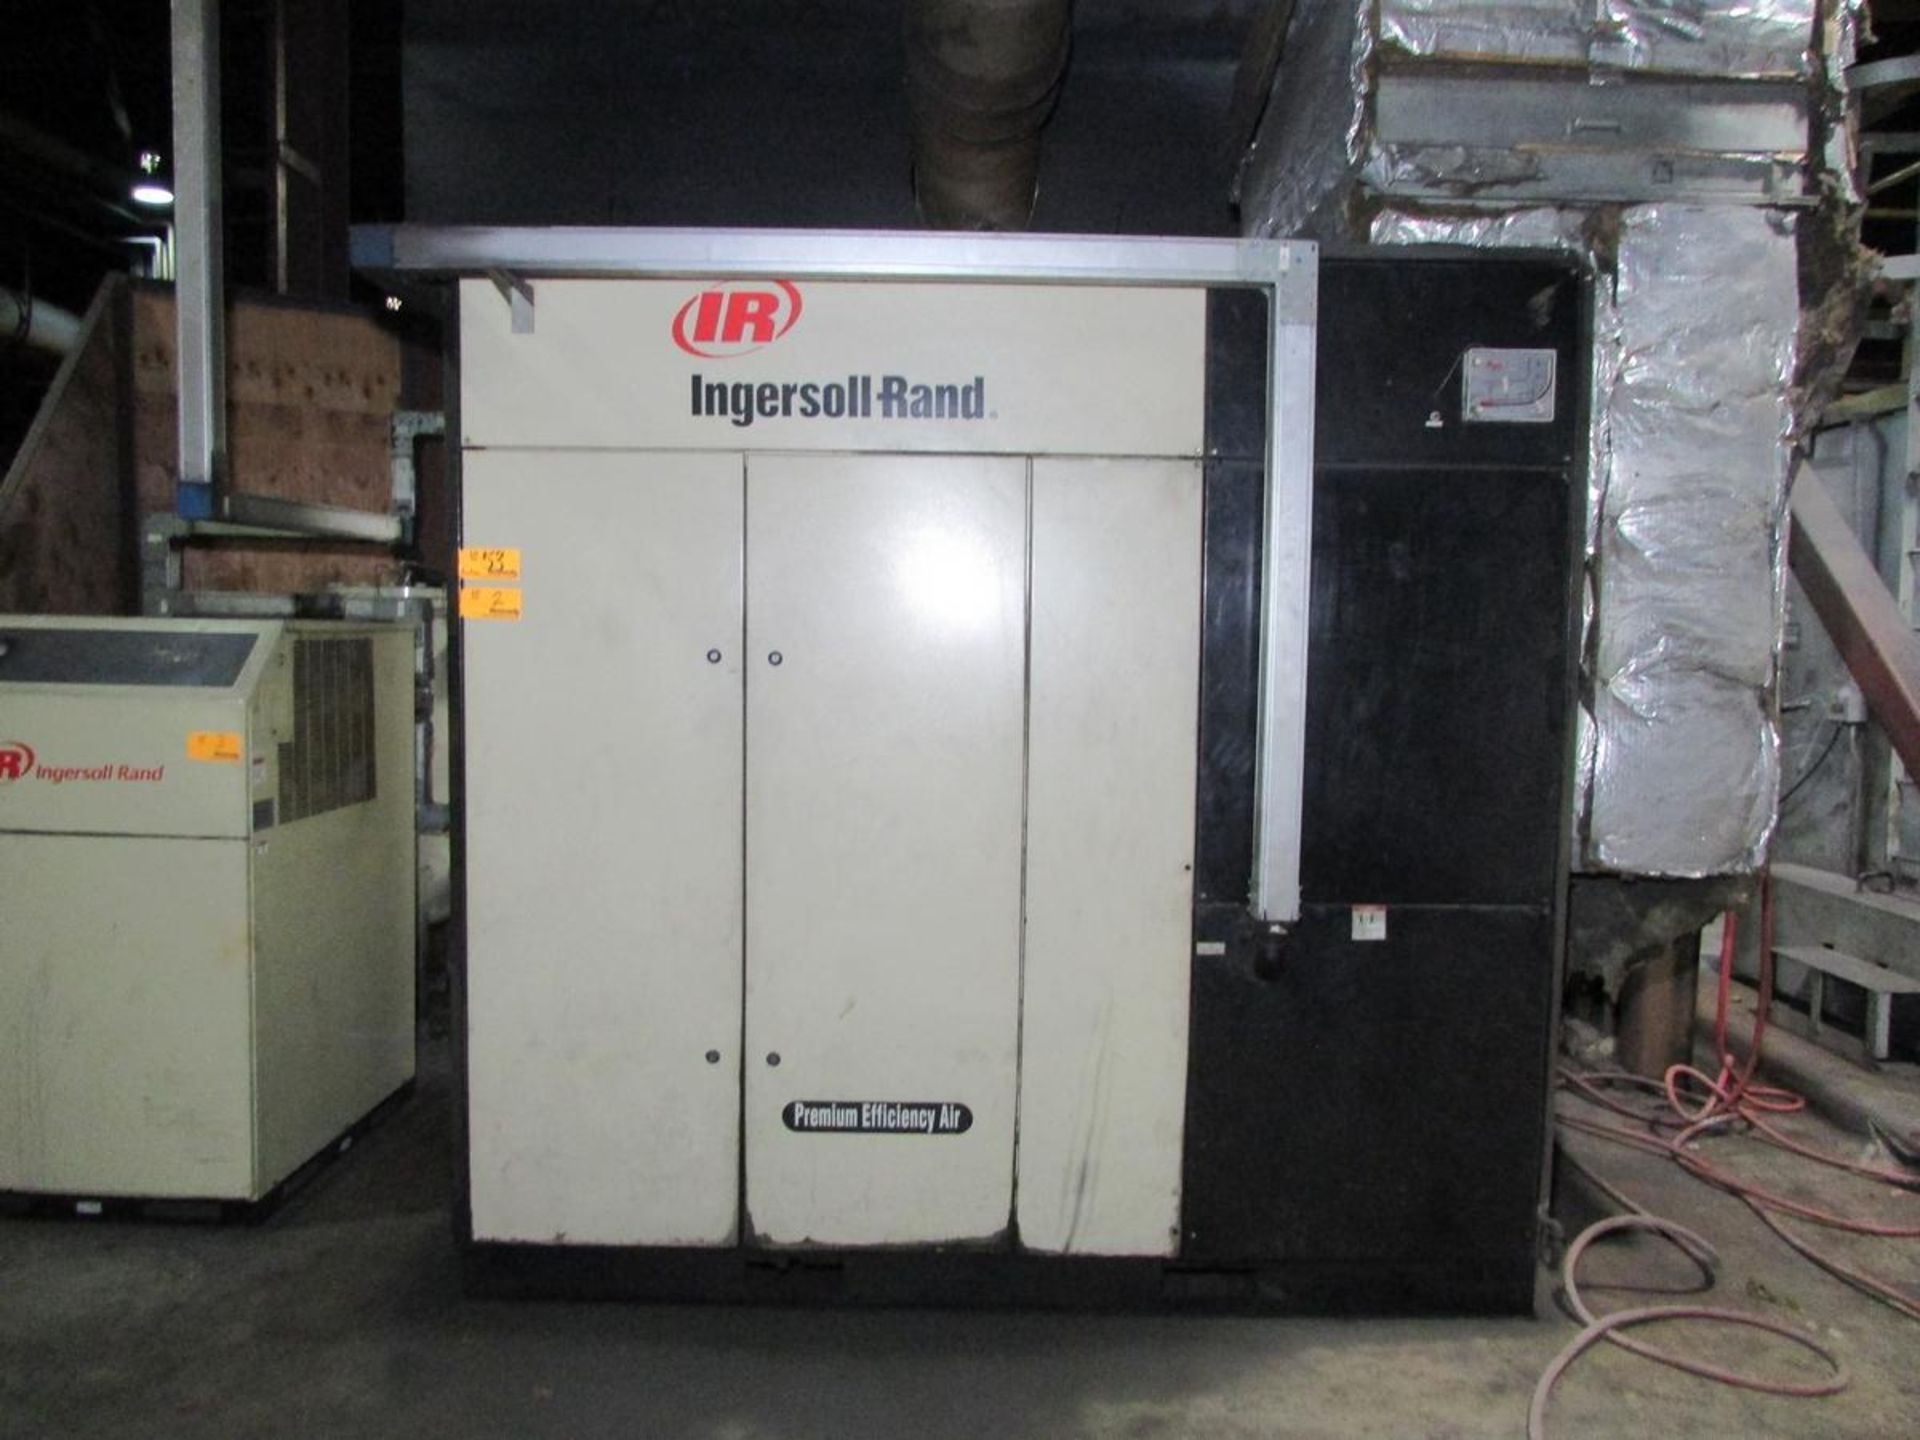 Ingersoll Rand 150 HP Rotary Screw Air Compressor - Image 2 of 11